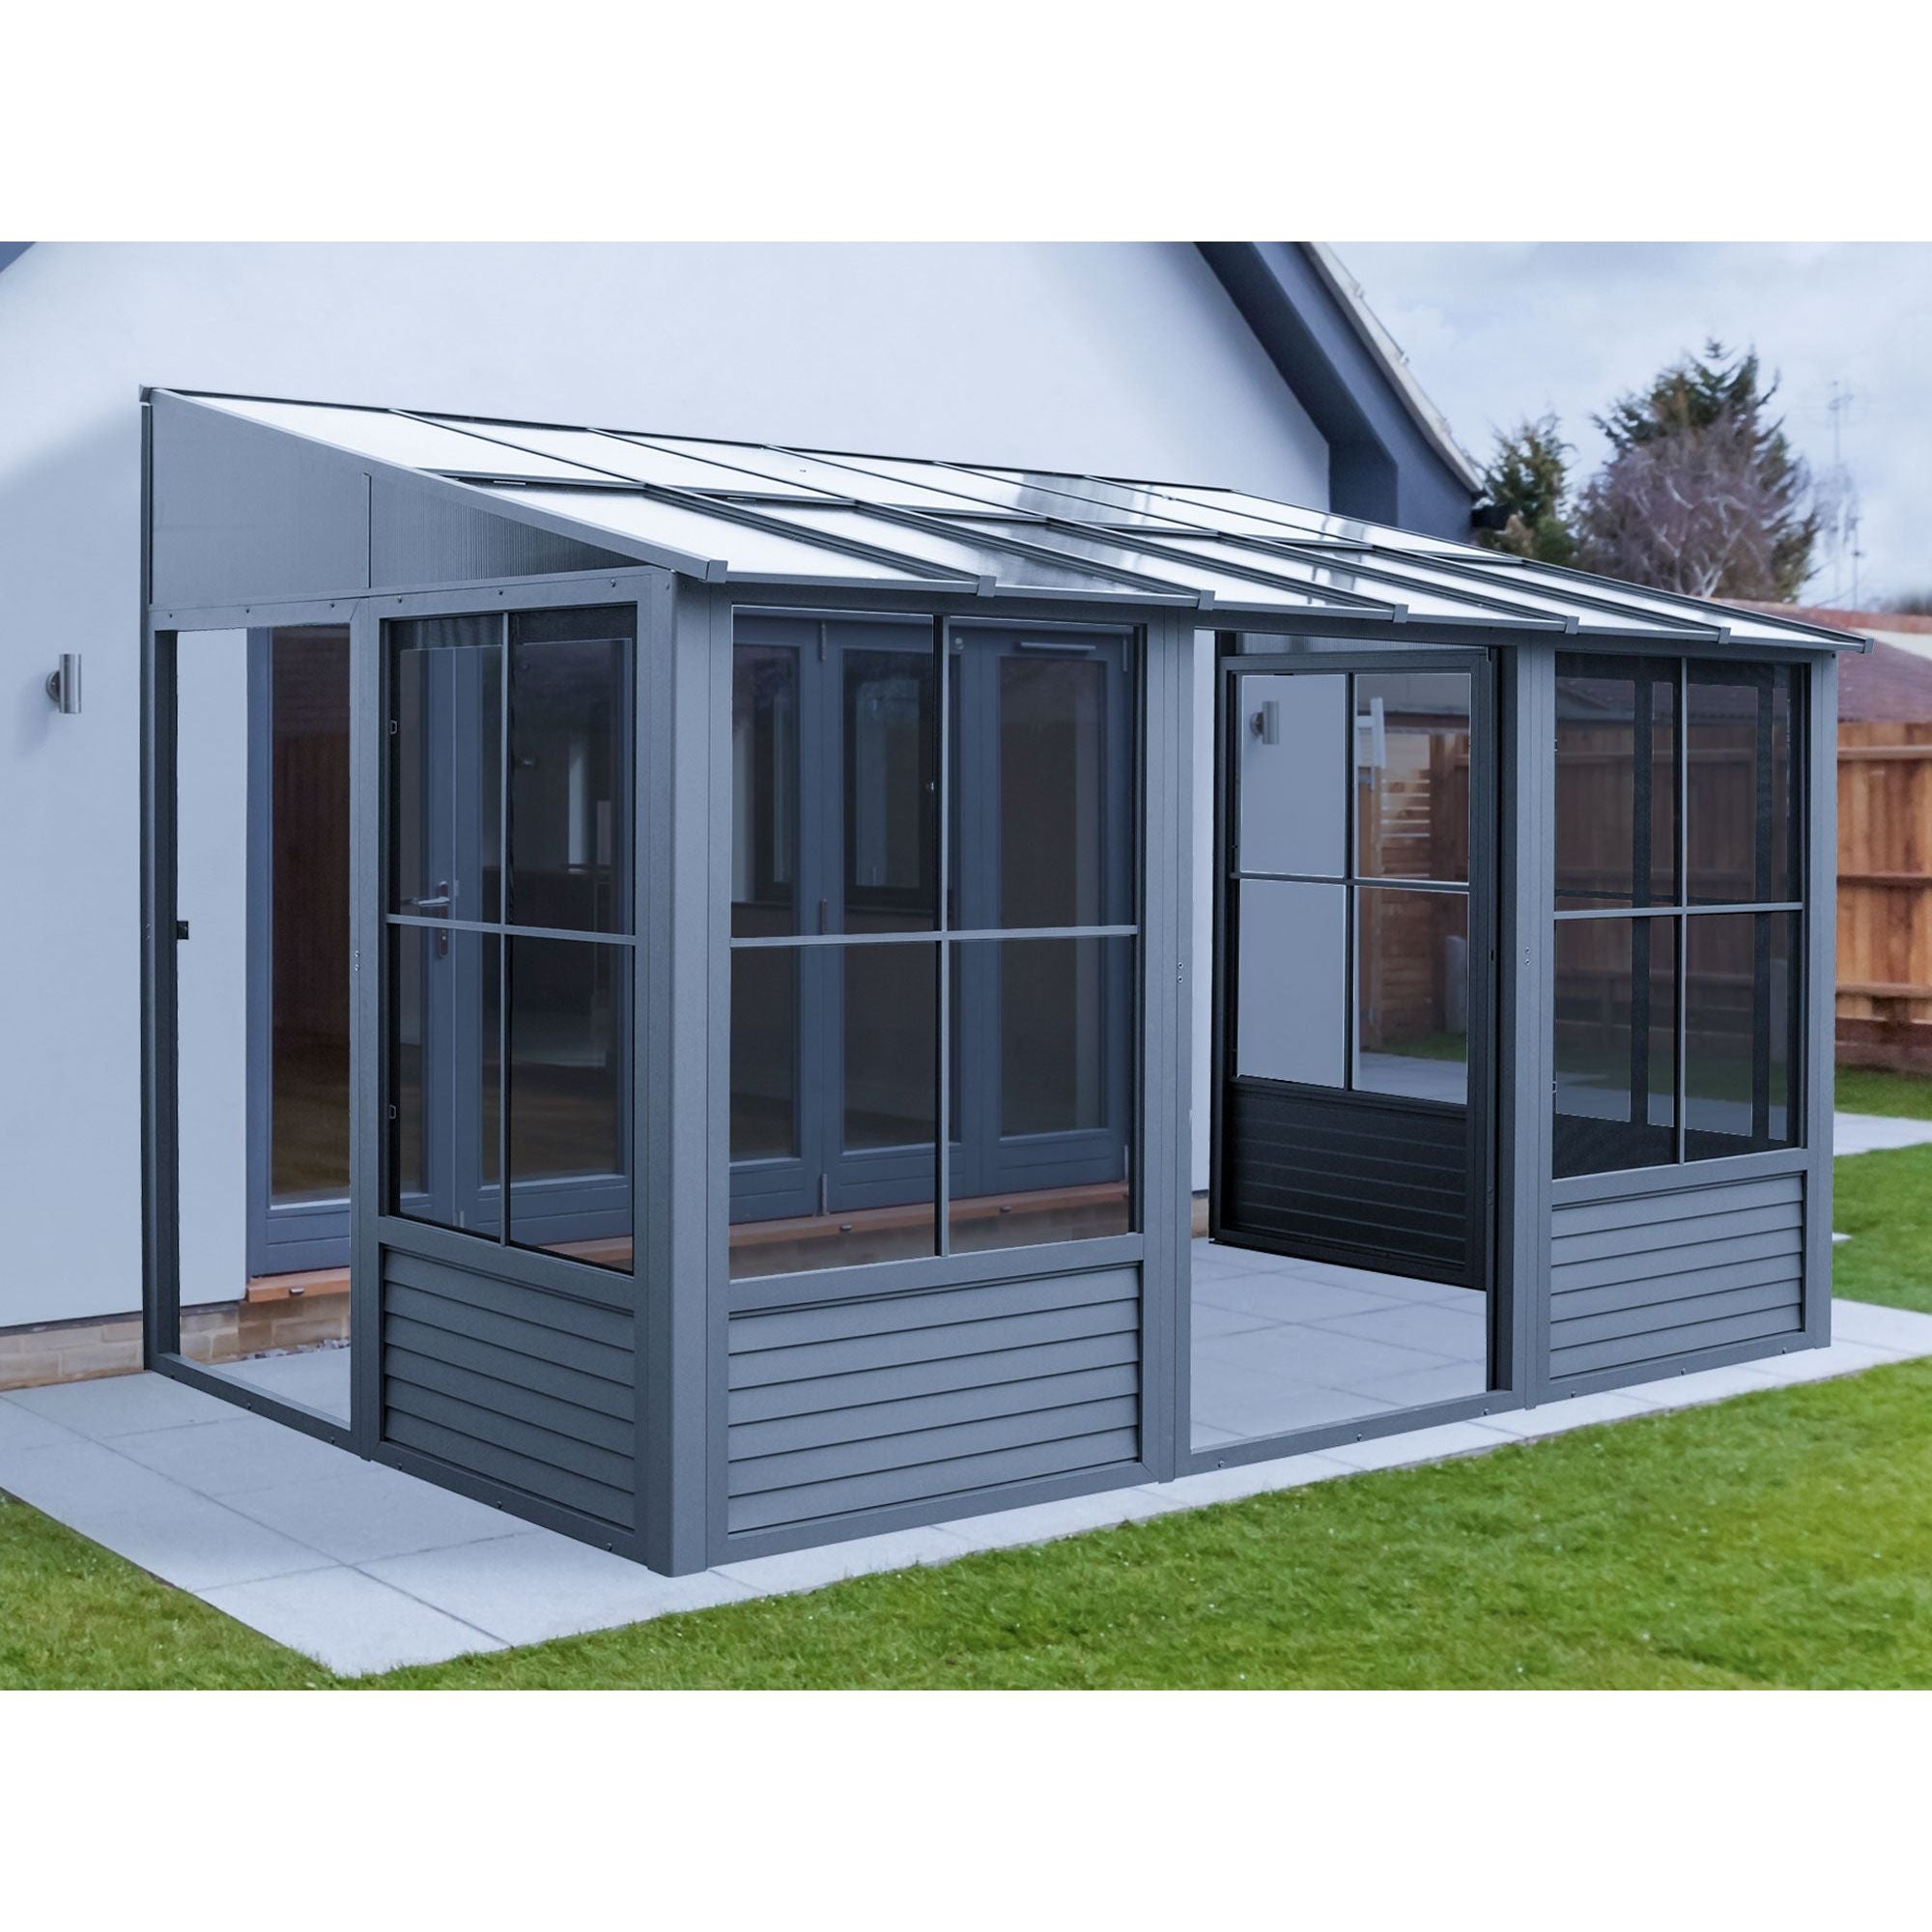 Gazebo Penguin Wall Mounted Florence Solarium with Polycarbonate Roof Add a Room 10'x12' - W1209 - Serenity Provision